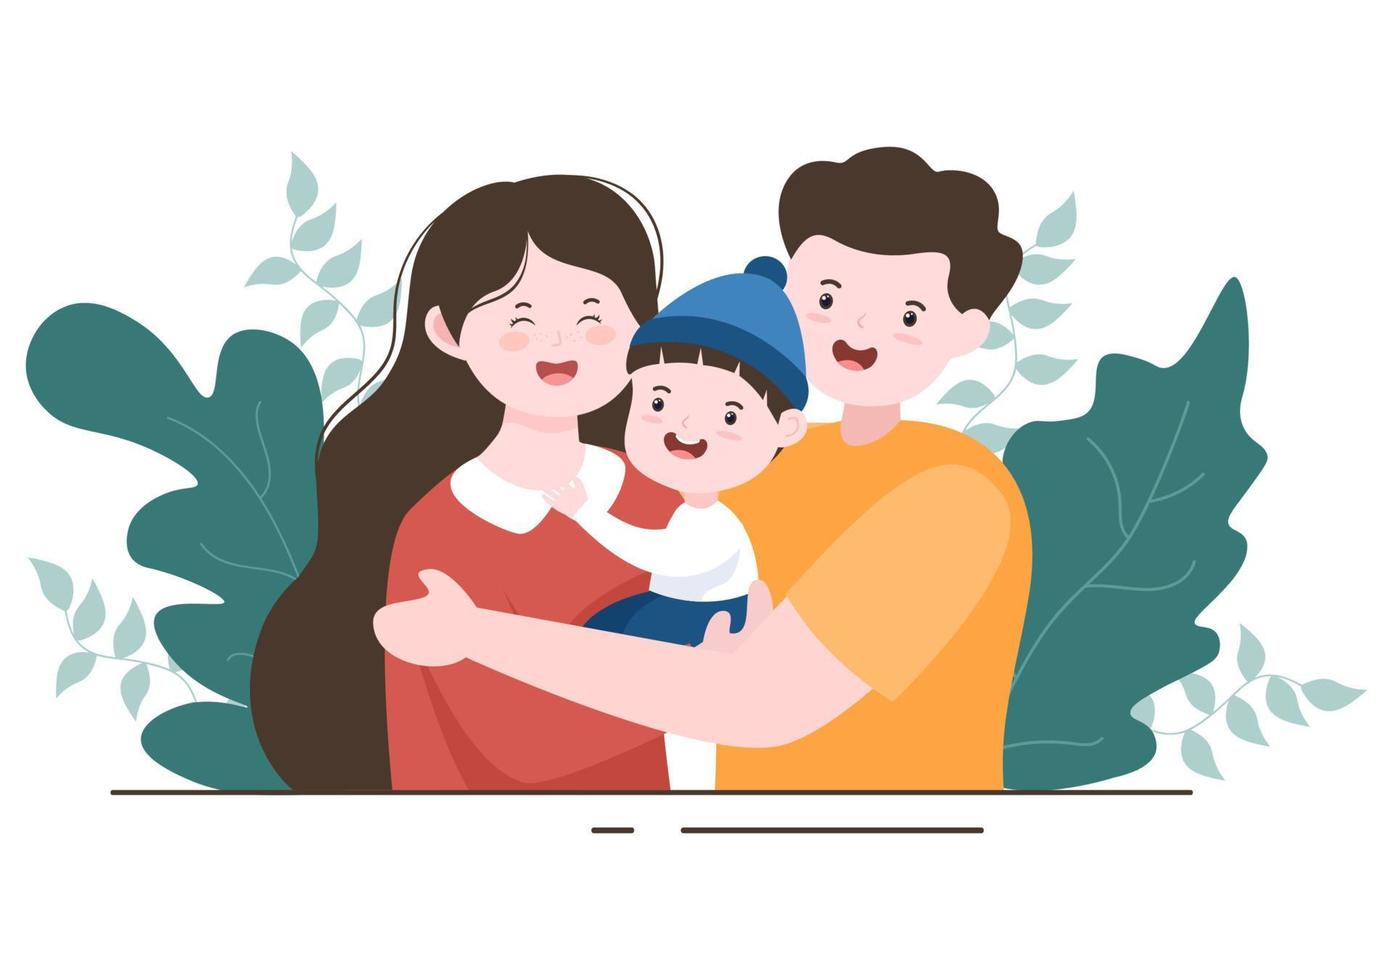 Parenting of Mother, Father and Kids Embracing Each Other in Loving Family. Cute Cartoon Background Vector Illustration for Banner or Psychology